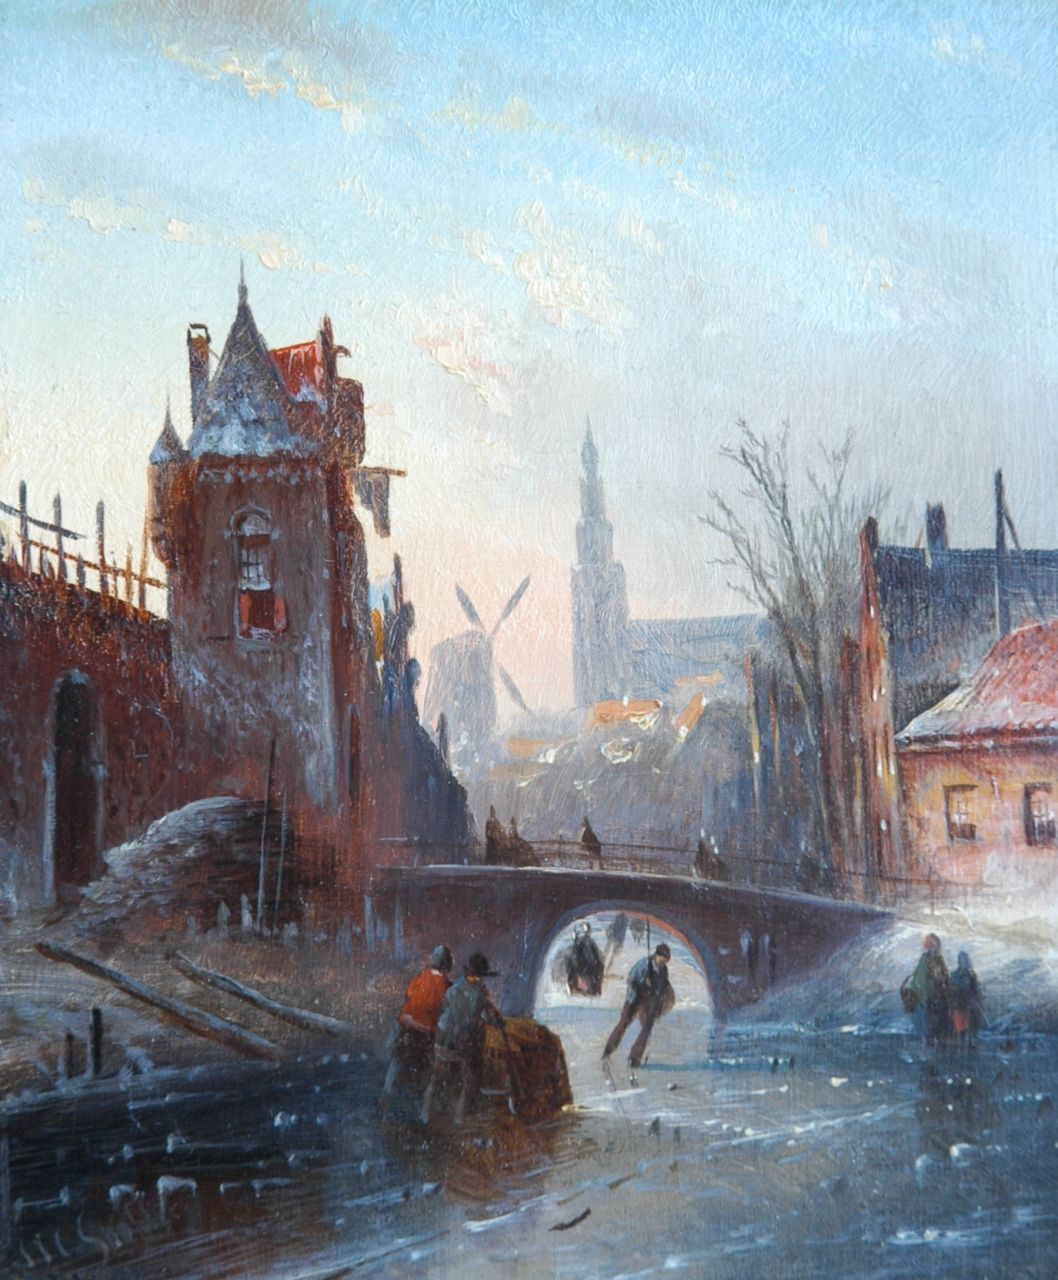 Spohler J.J.C.  | Jacob Jan Coenraad Spohler, A town view with skaters, oil on panel 19.0 x 15.7 cm, signed l.l. with initials